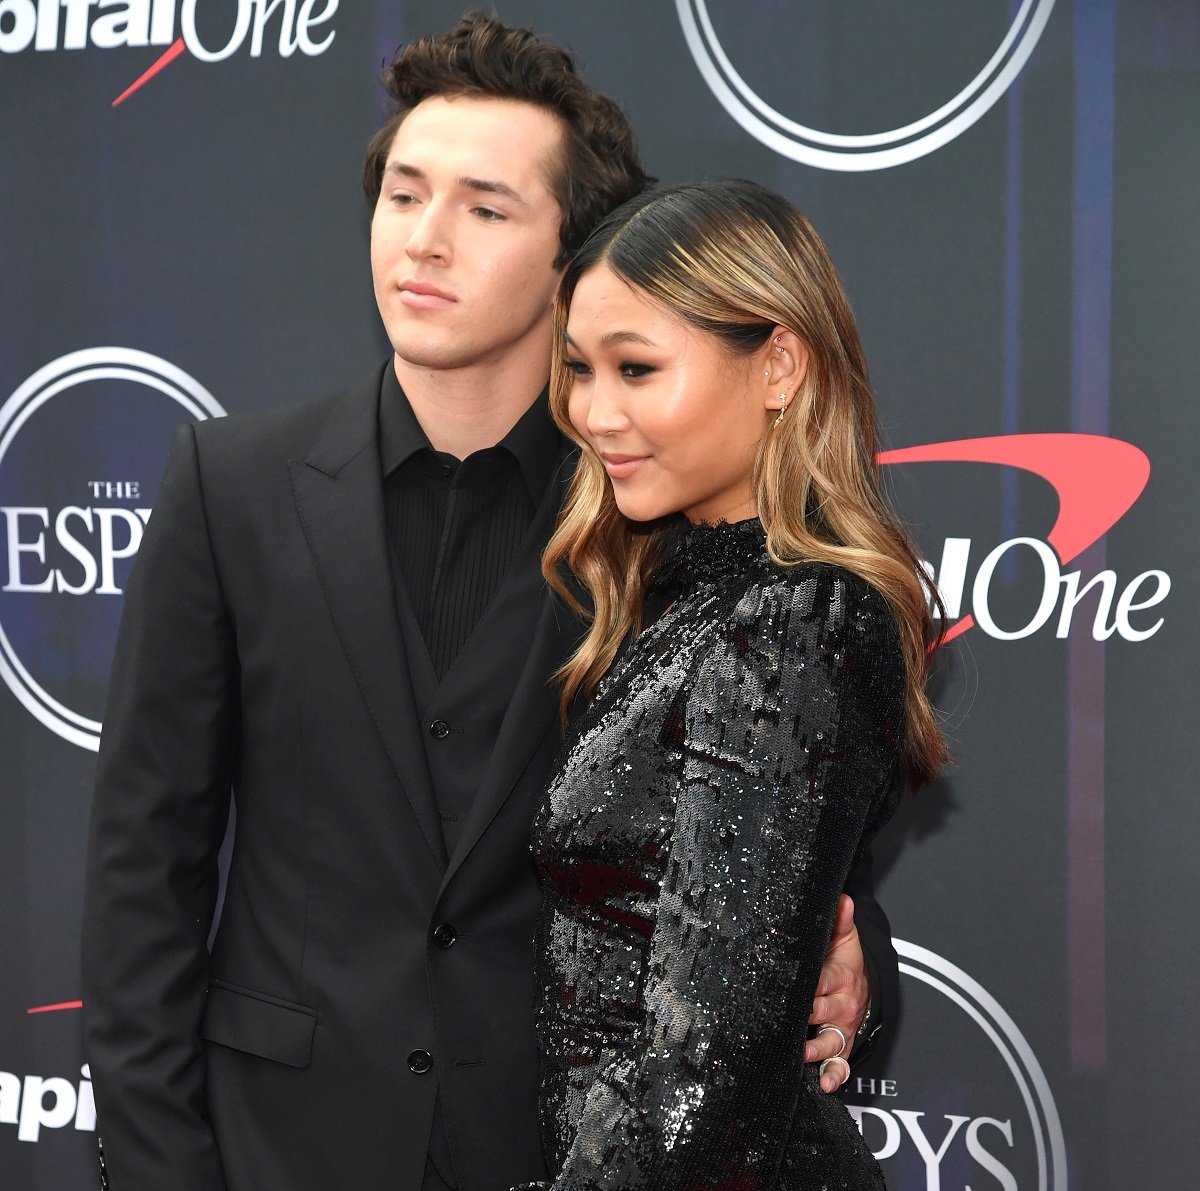 Chloe Kim poses for photo on the carpet at the 2021 ESPY Awards with boyfriend Evan Berle